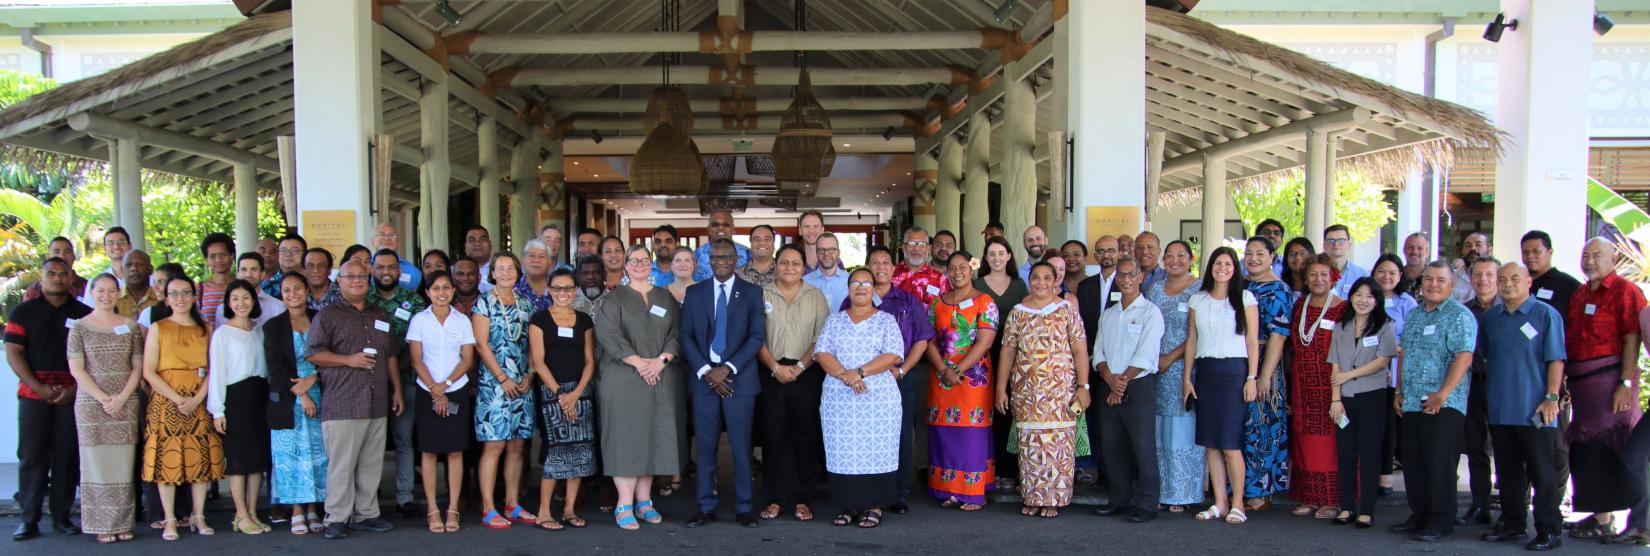 Meeting participants pose for a photo at the Pacific Resilience Partnership workshop in Nadi. The workshop convened regional and national partners to discuss anticipatory action and the role it can play in reducing impacts of disasters and crises before they occur.